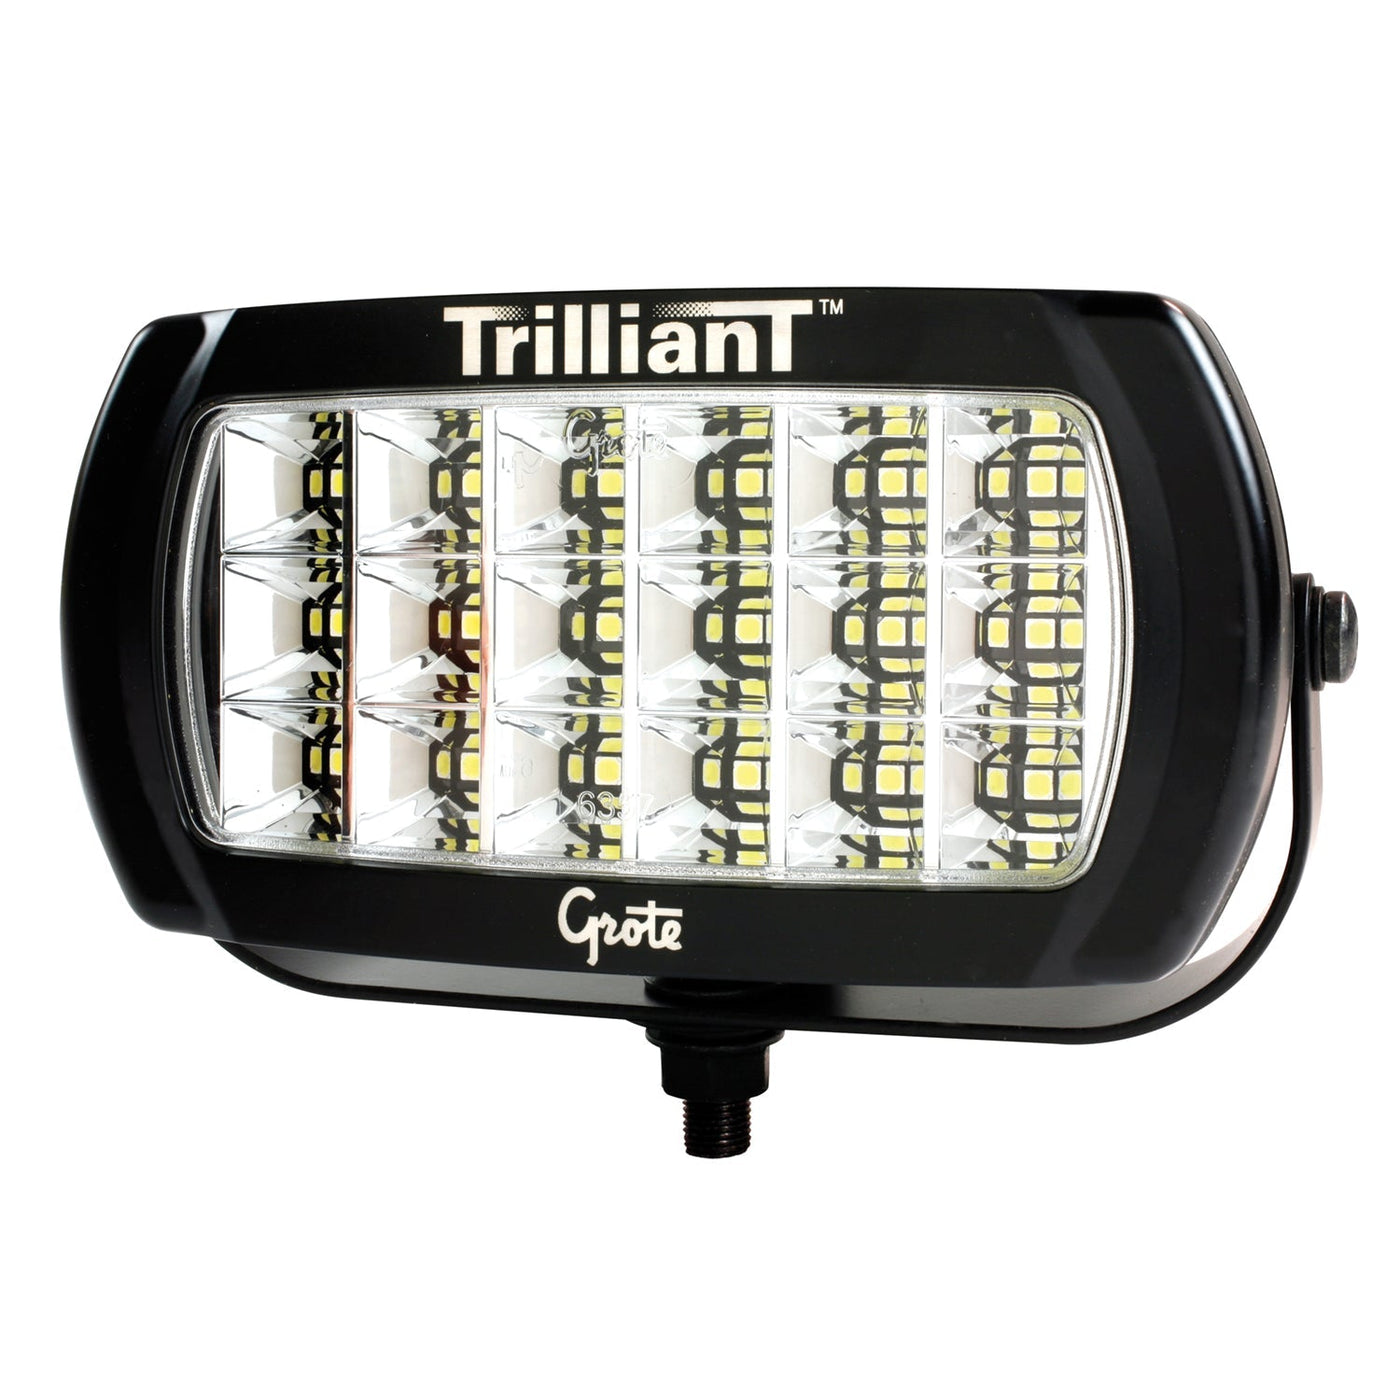 Grote Grote - 089373150680 - Forward Lighting, Trilliant LED Work Lamp,  Flood Pattern, W/Reflector